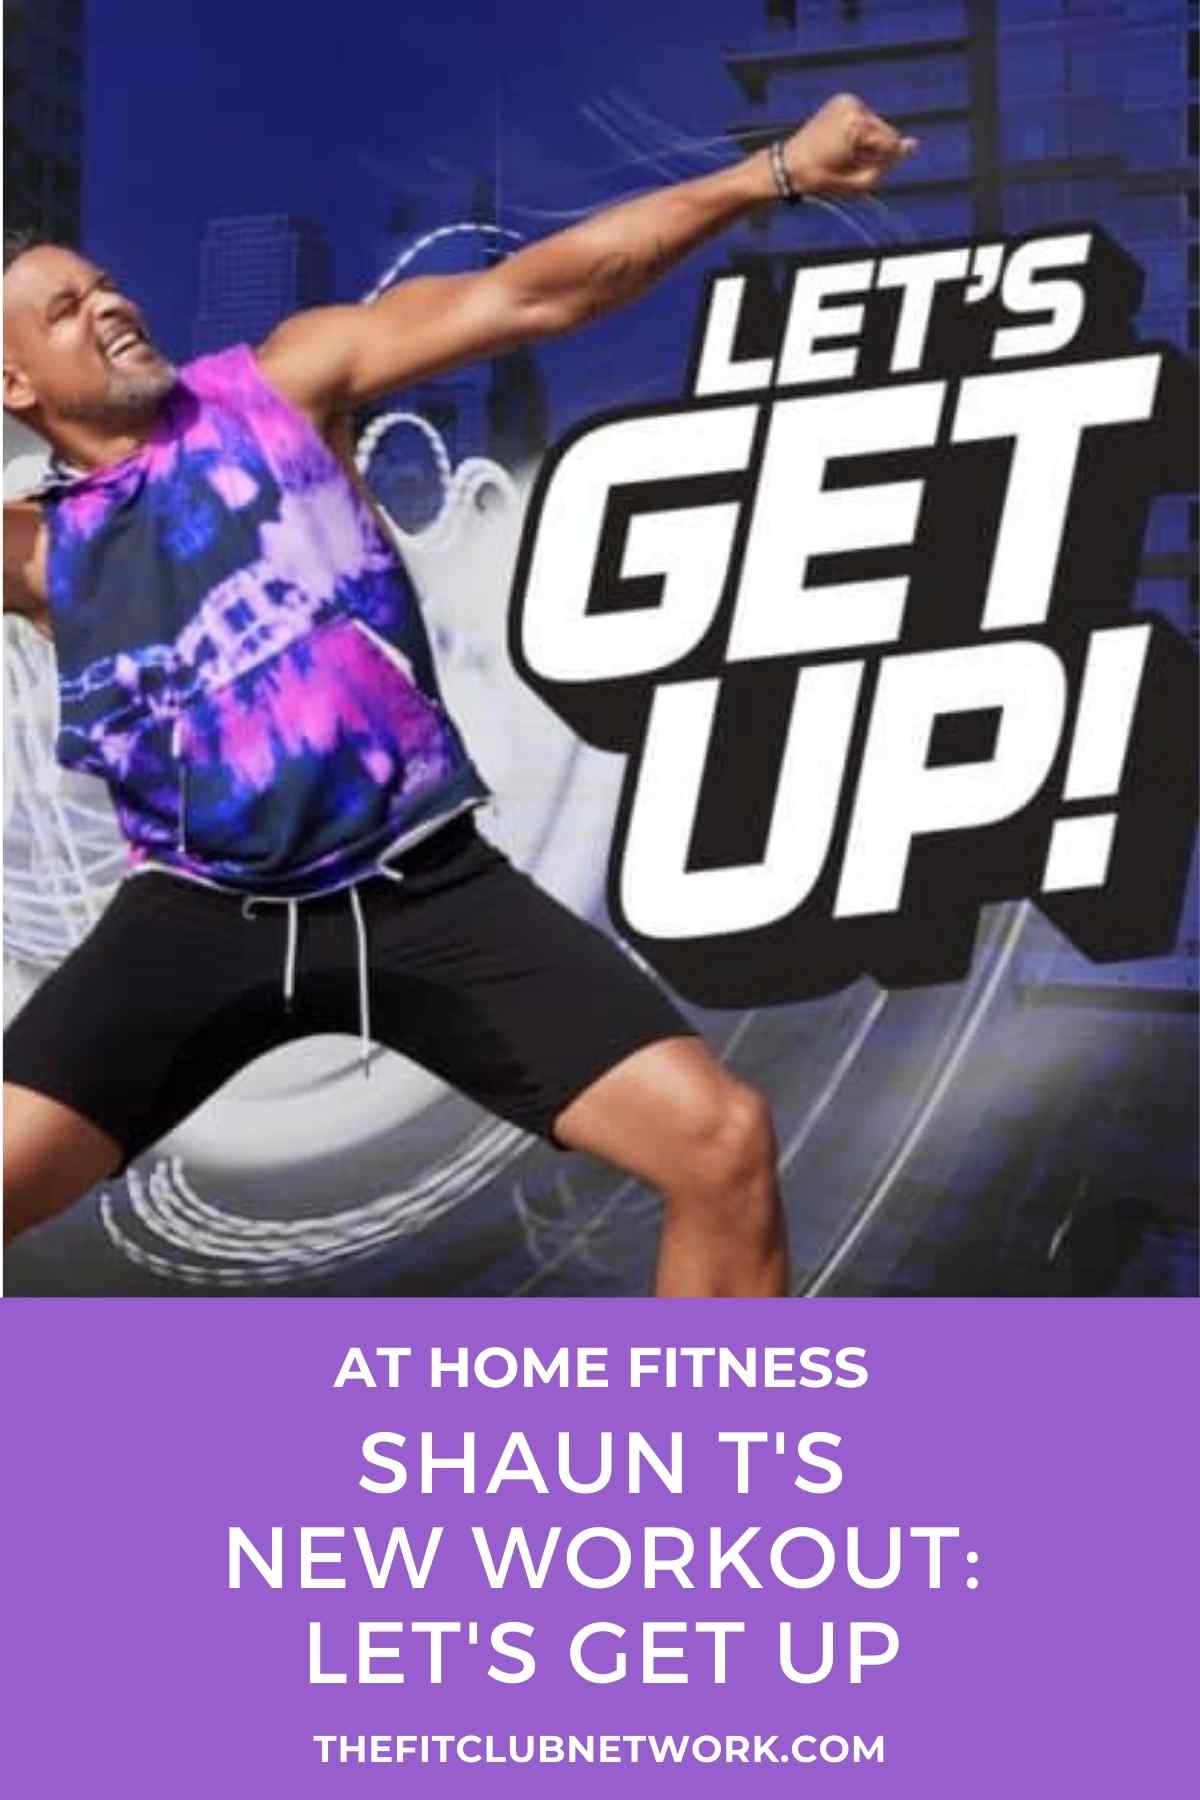 Shaun T's New Workout — “Let’s Get Up!” | THEFITCLUBNETWORK.COM